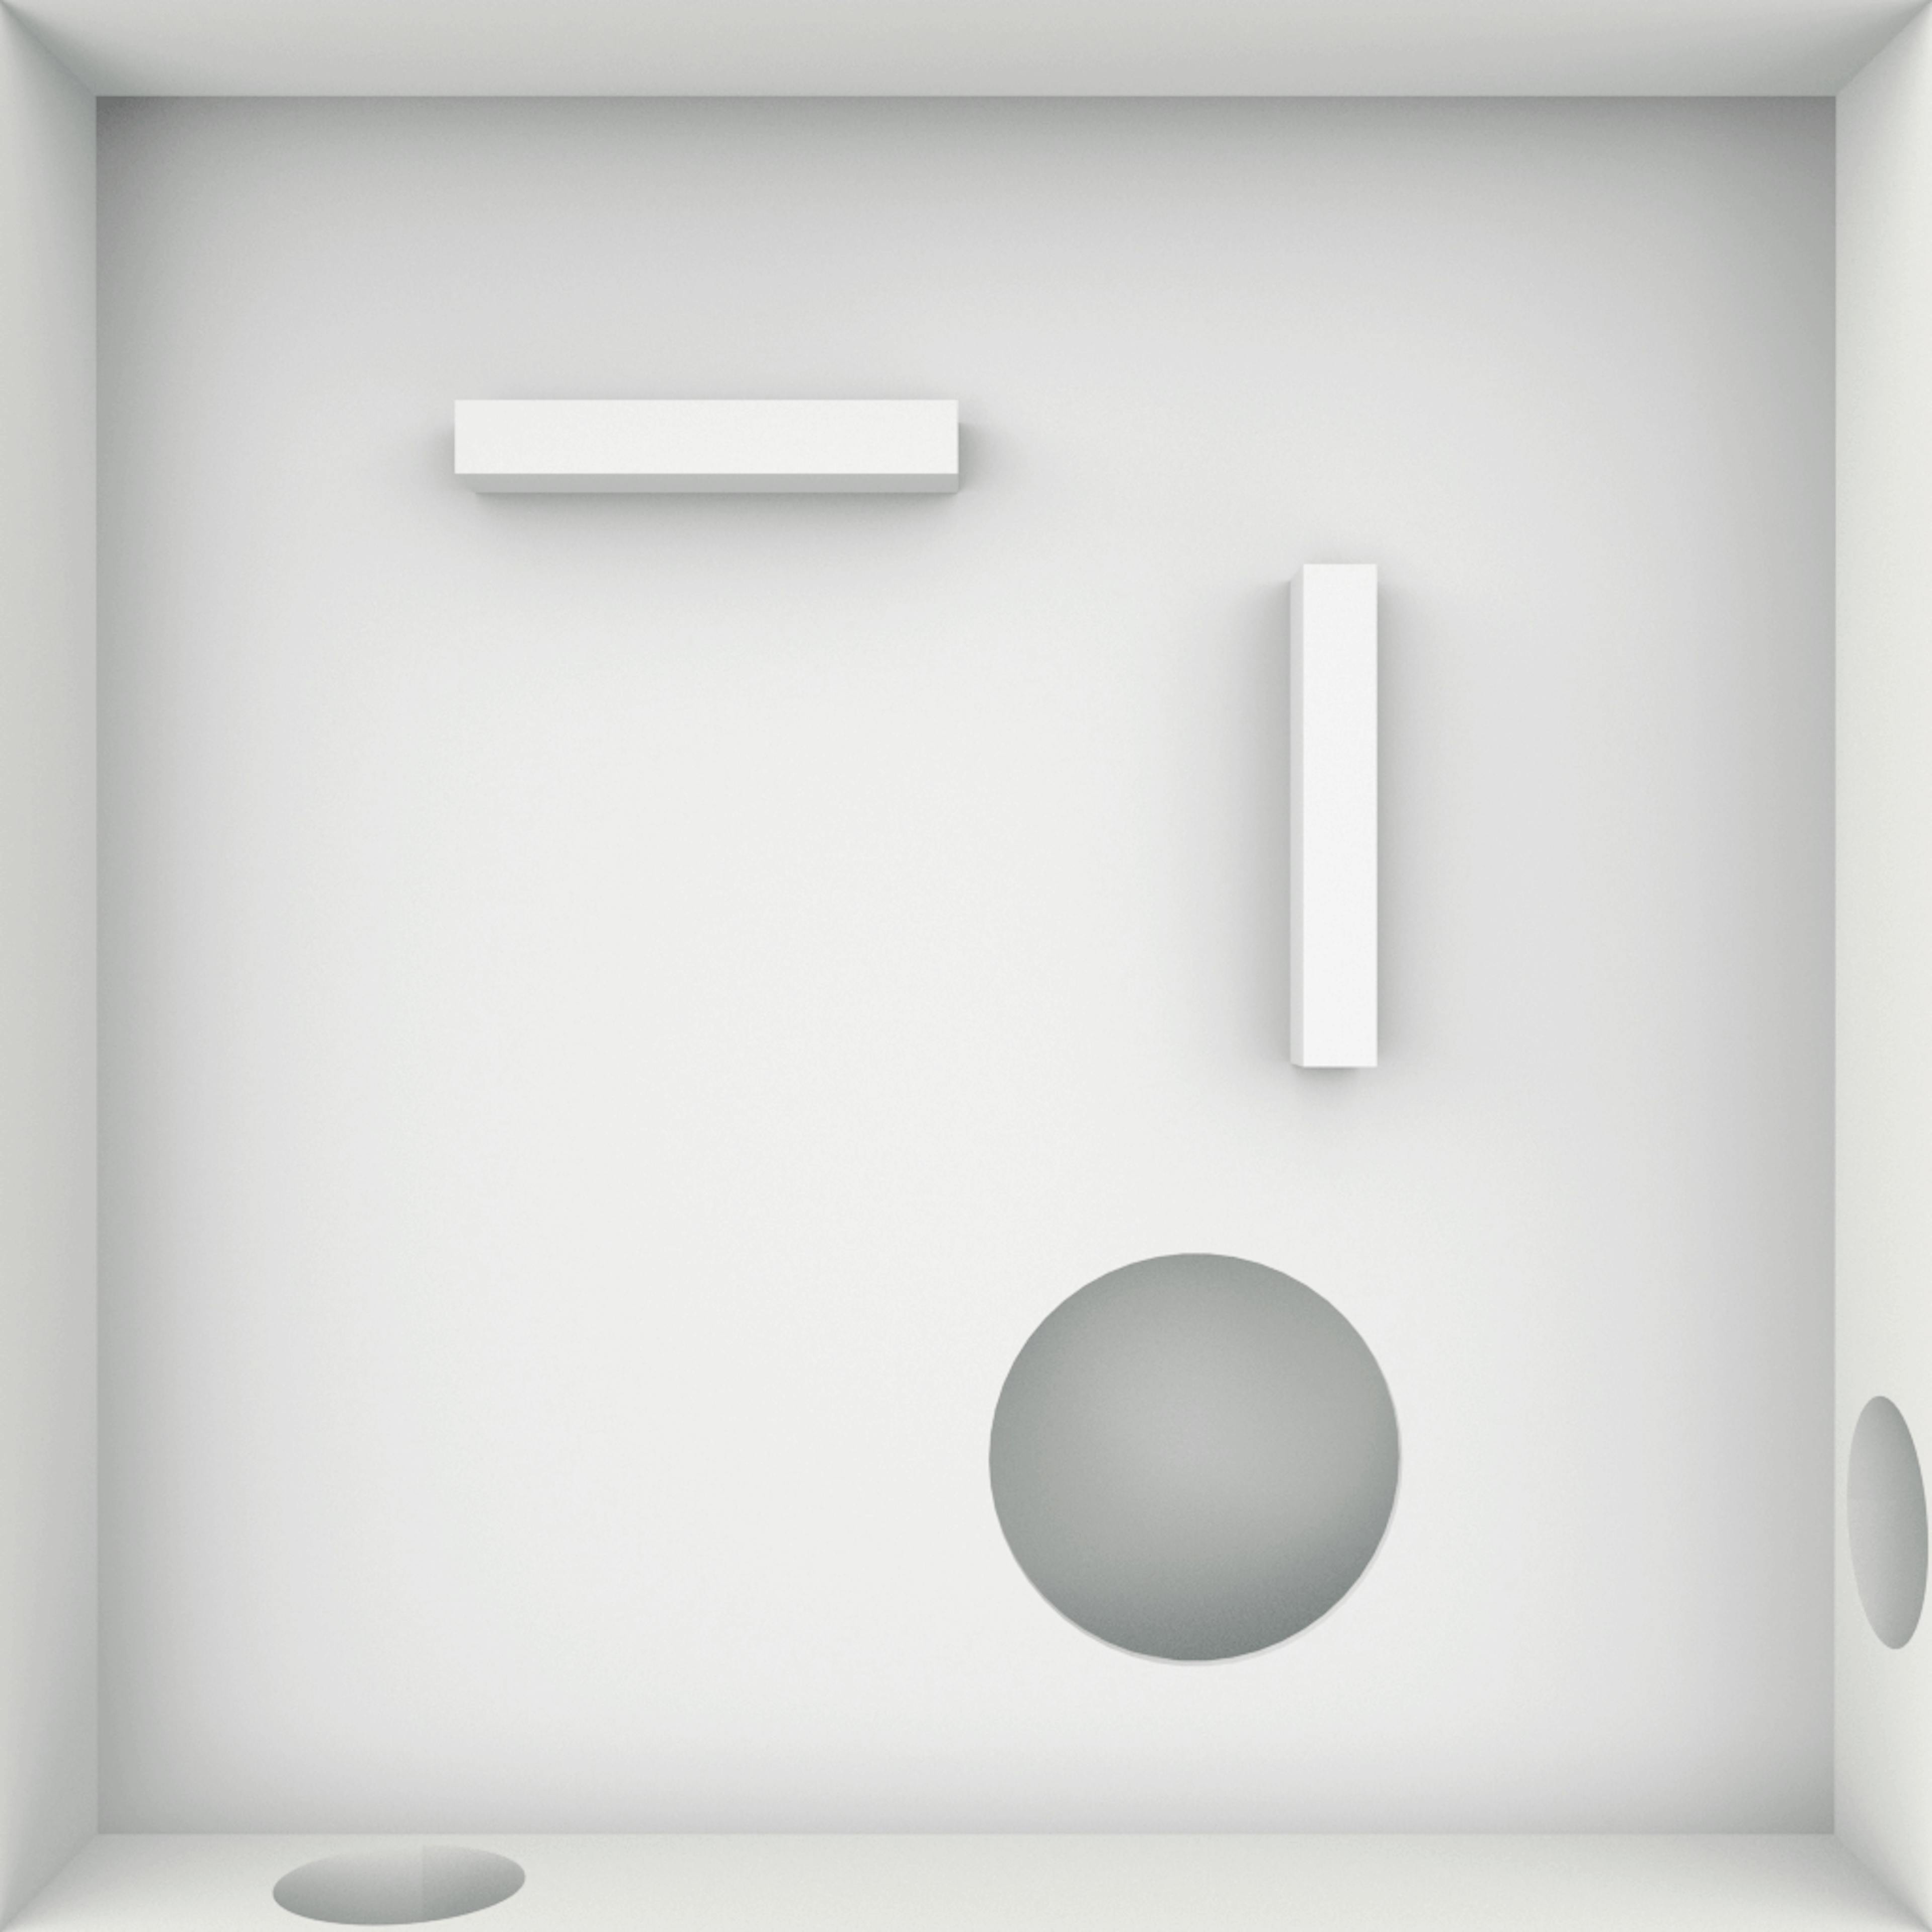 A maze of white boxes and holes on a square white background.